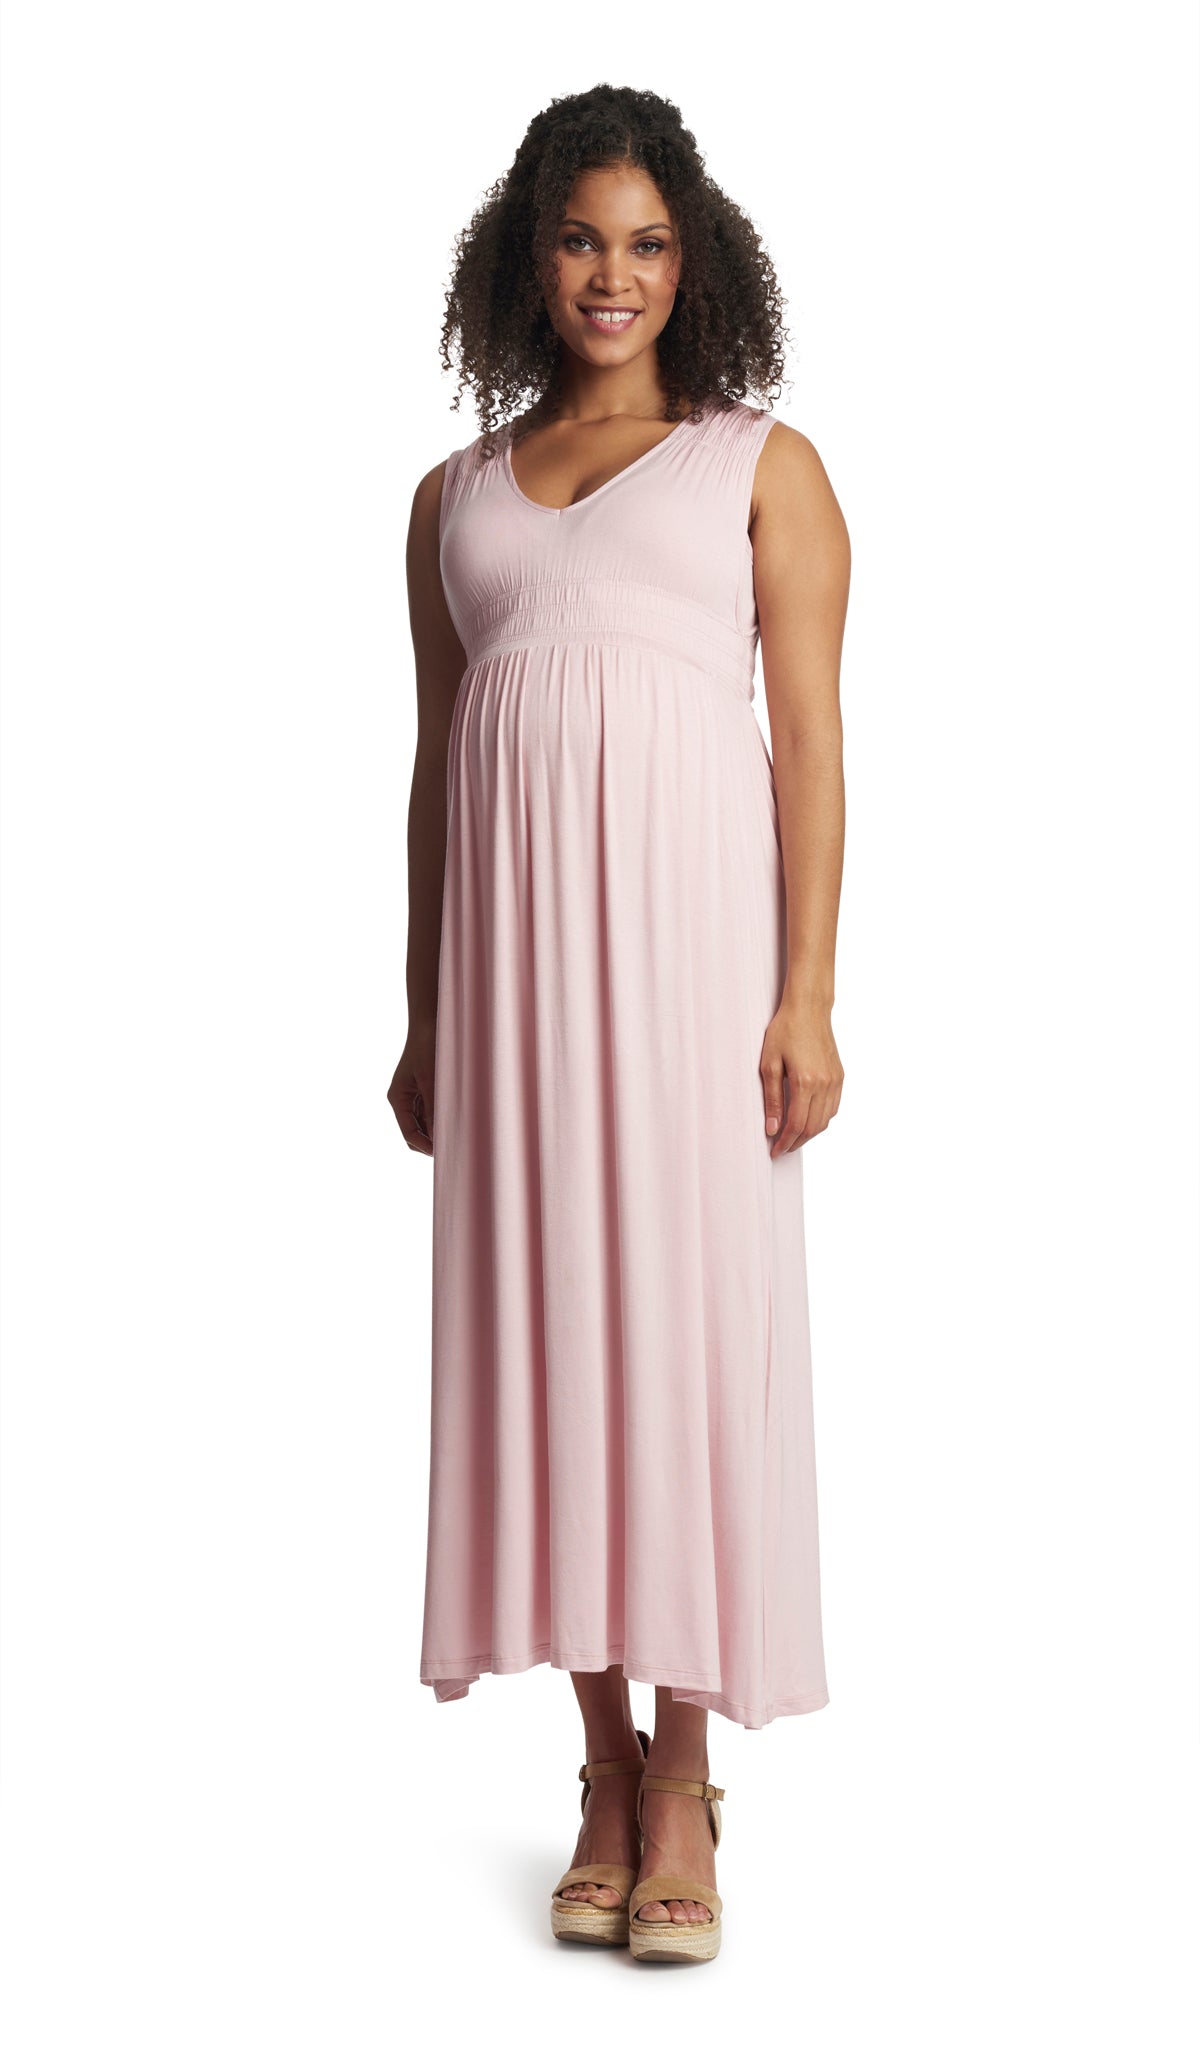 Blush Valeria dress worn by pregnant woman with arms down to side.